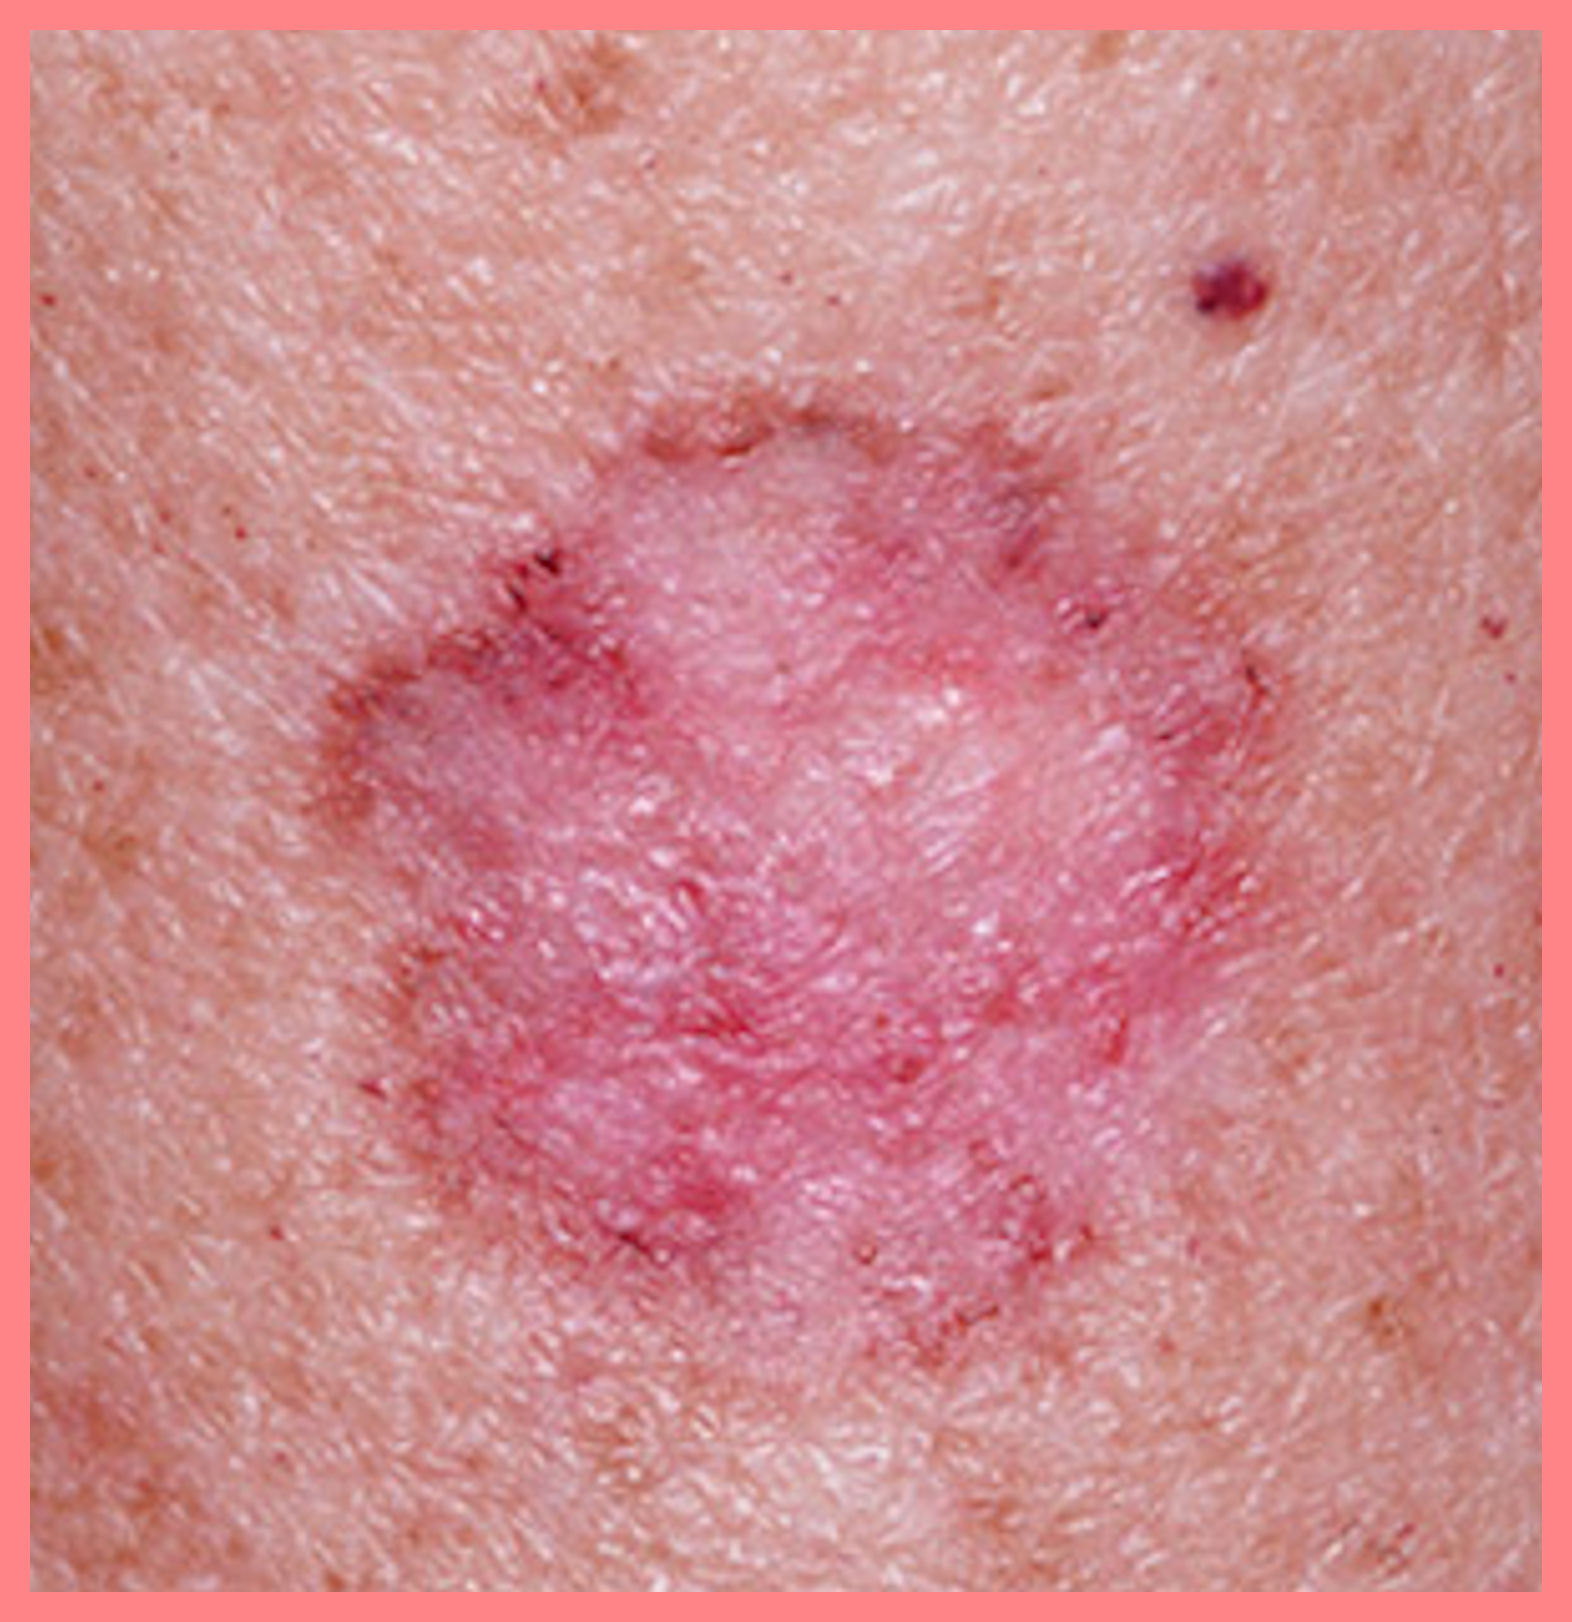  skin  disease  pic pictures photos